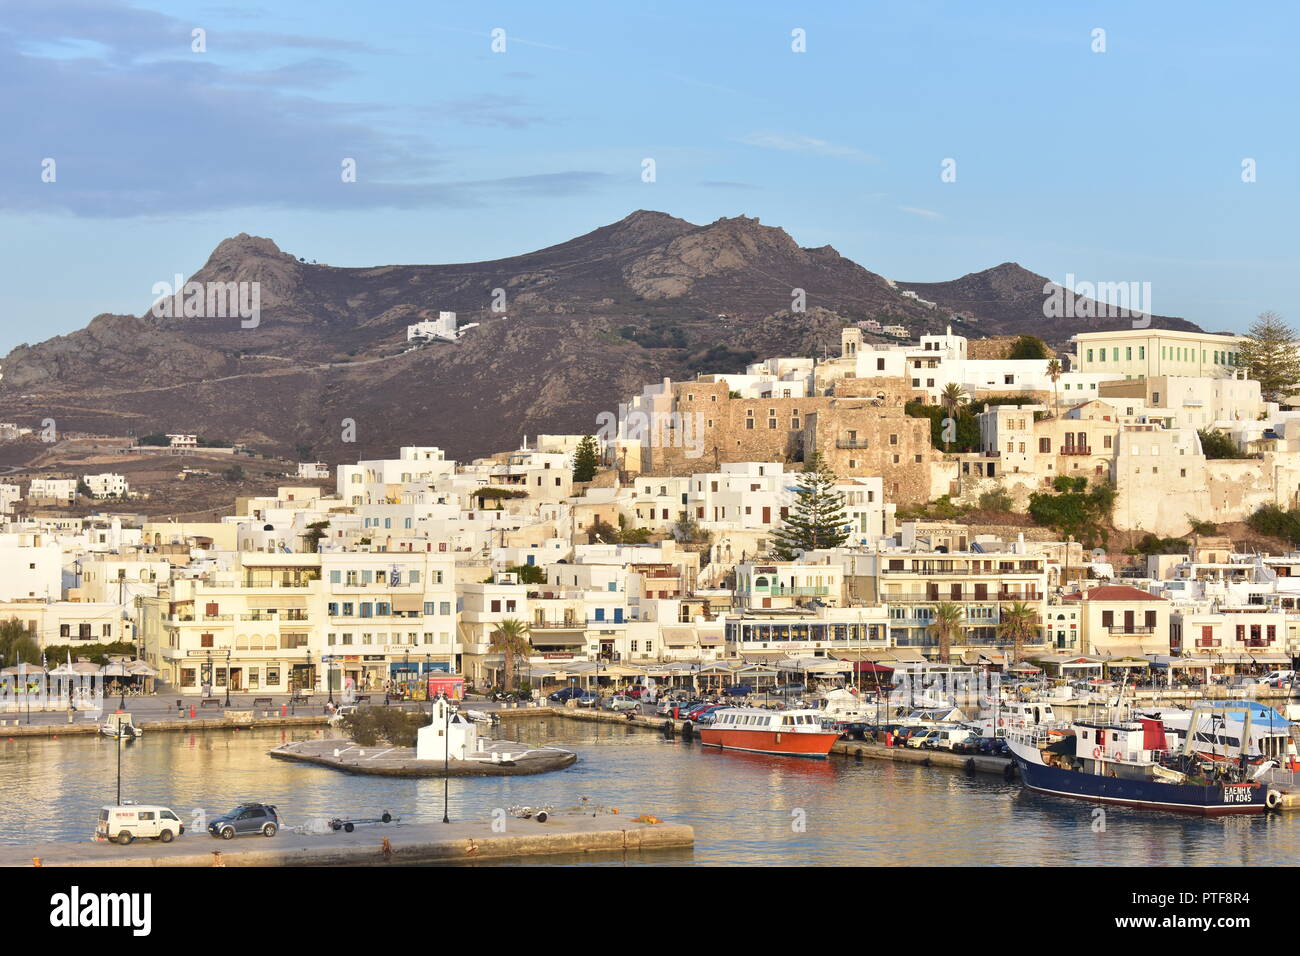 Greece, the beautiful island of Naxos. The ferry comes into dock in the  late afternoon giving a view of the islands capital, Naxos town Stock Photo  - Alamy